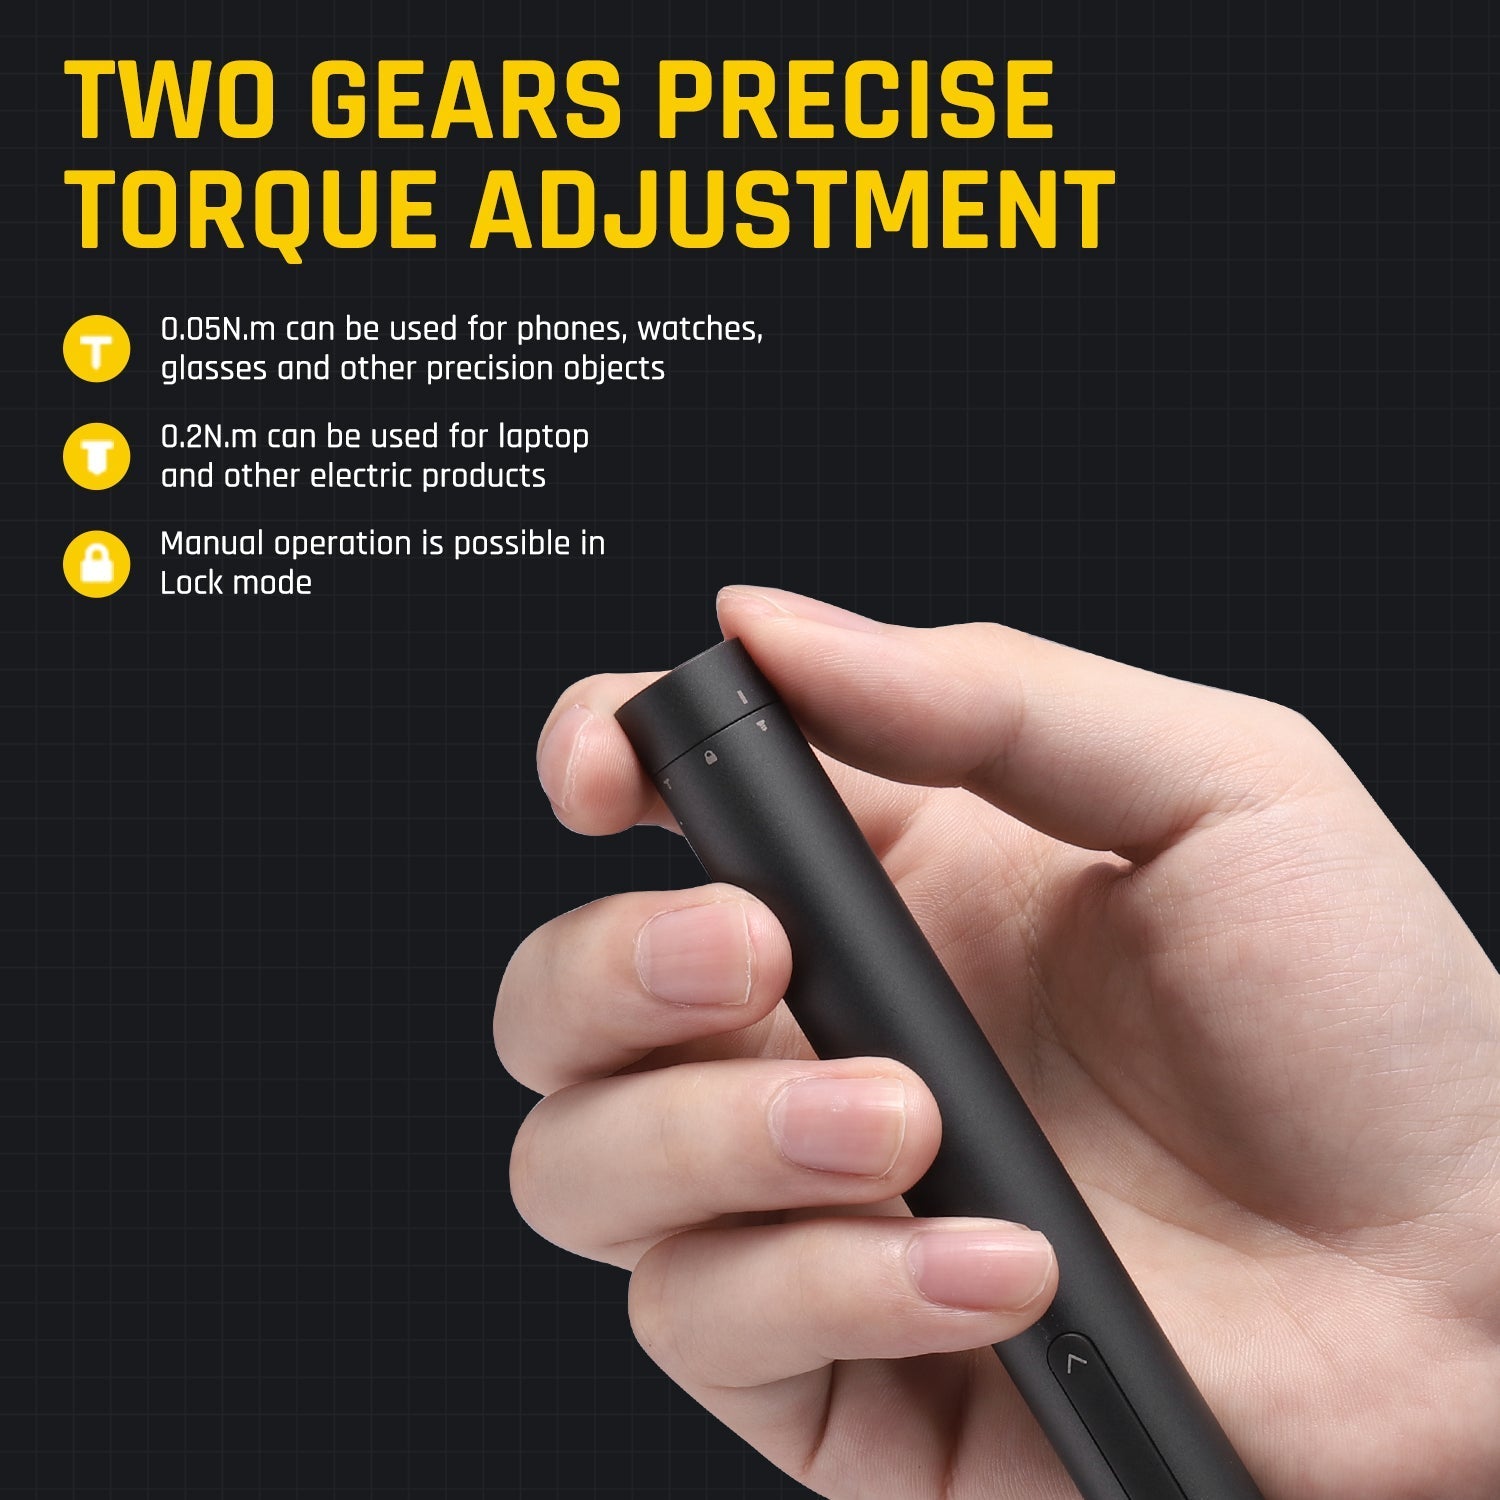 Fanttik E1 PRO Mini Electric Screwdriver has a high and low electric torque of 0.2/0.05N.m and a manual torque of 3N.m.